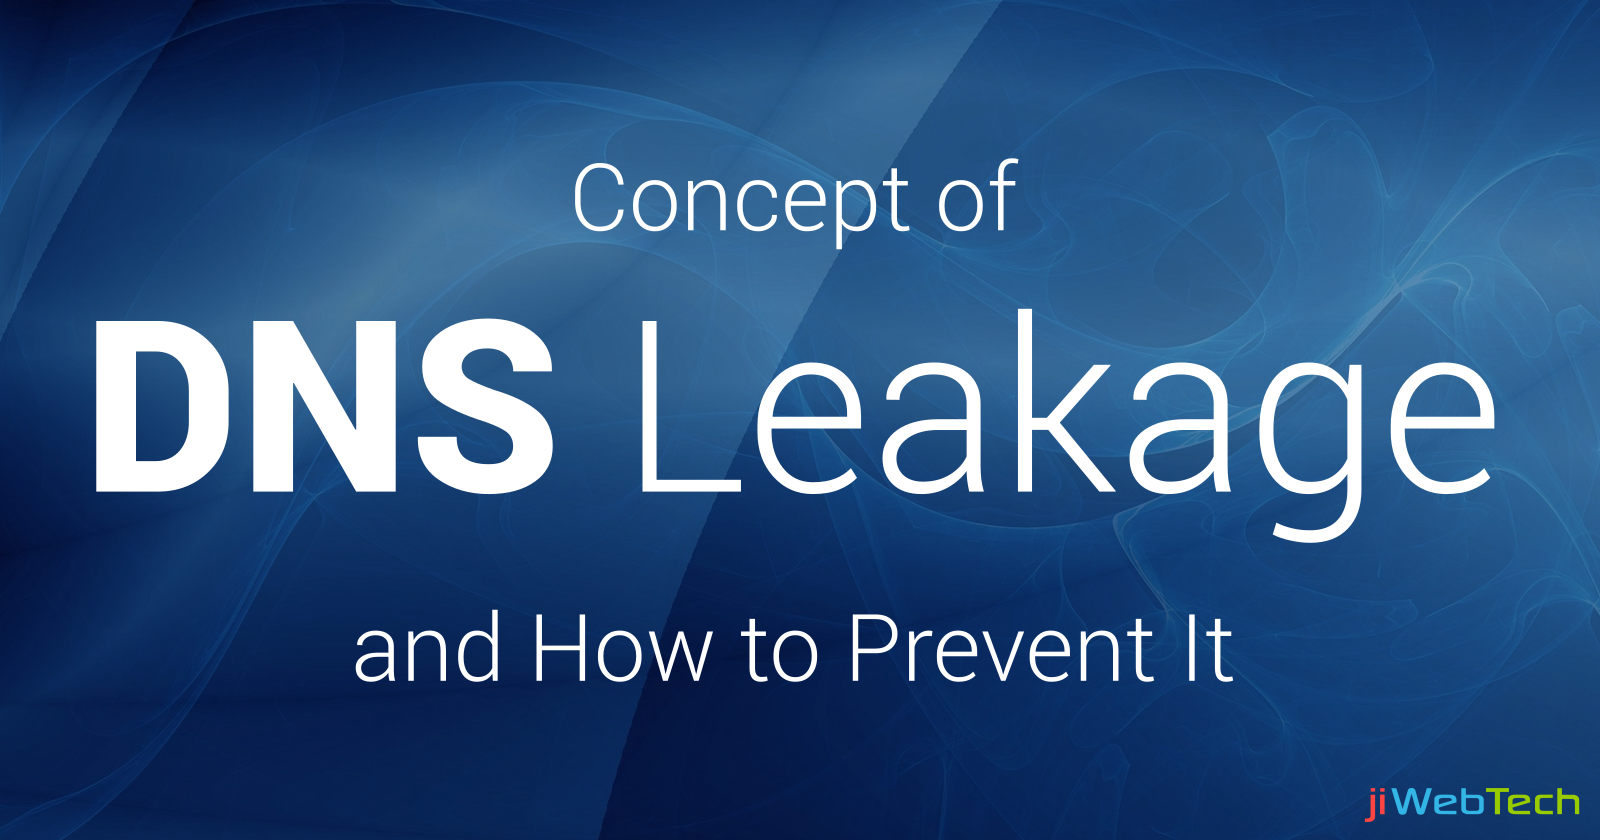 Concept of DNS Leakage and Techniques to Prevent It